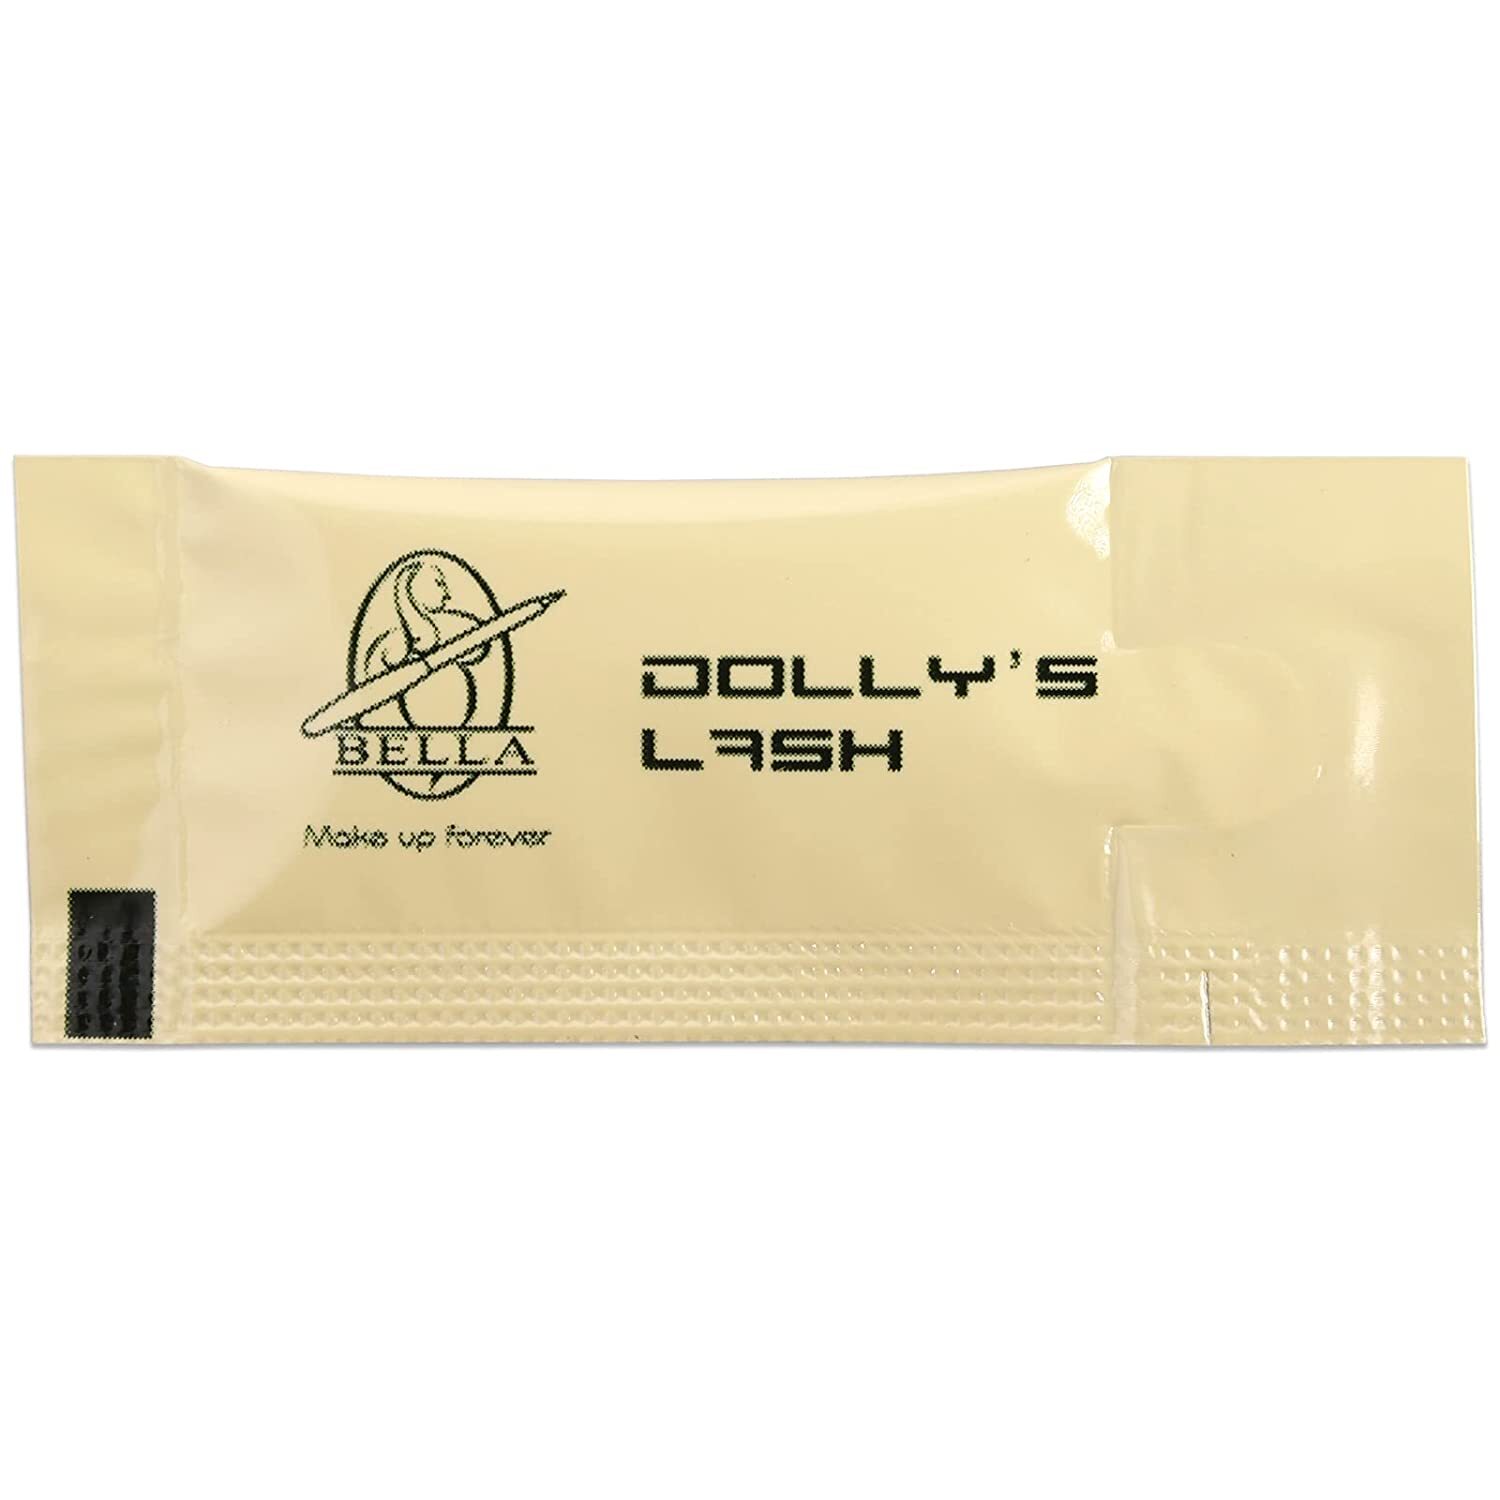 Dolly Lash Lift Perm Lotion - Pack of  5 